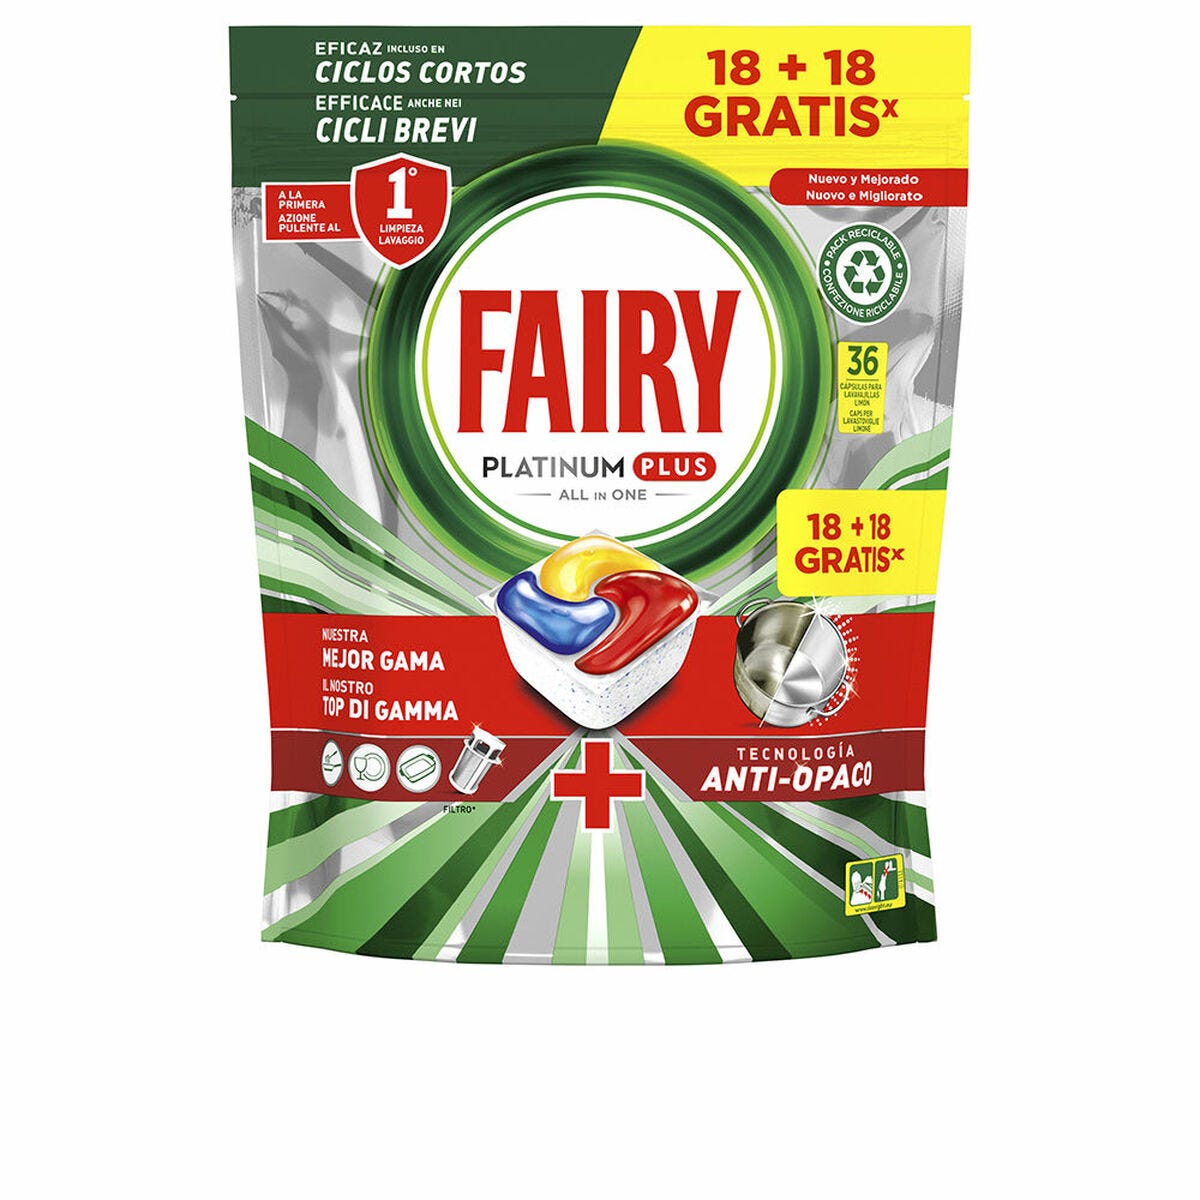 Fairy - Platinum plus all in one tablettes lave vaisselle regular (16  pièces), Delivery Near You